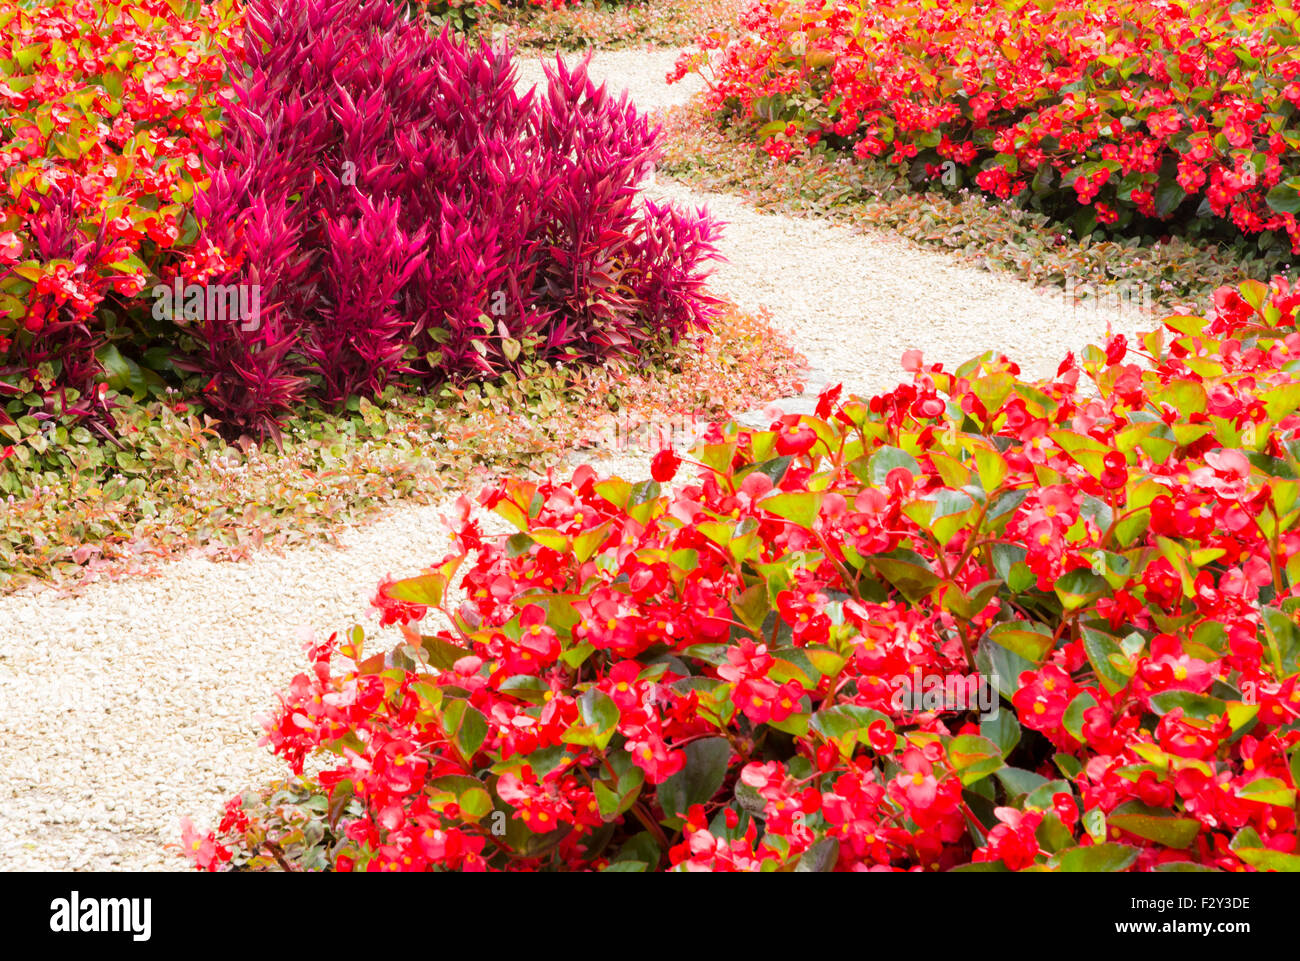 Curved sidewalk through a flowerbed full of red flowers Stock Photo